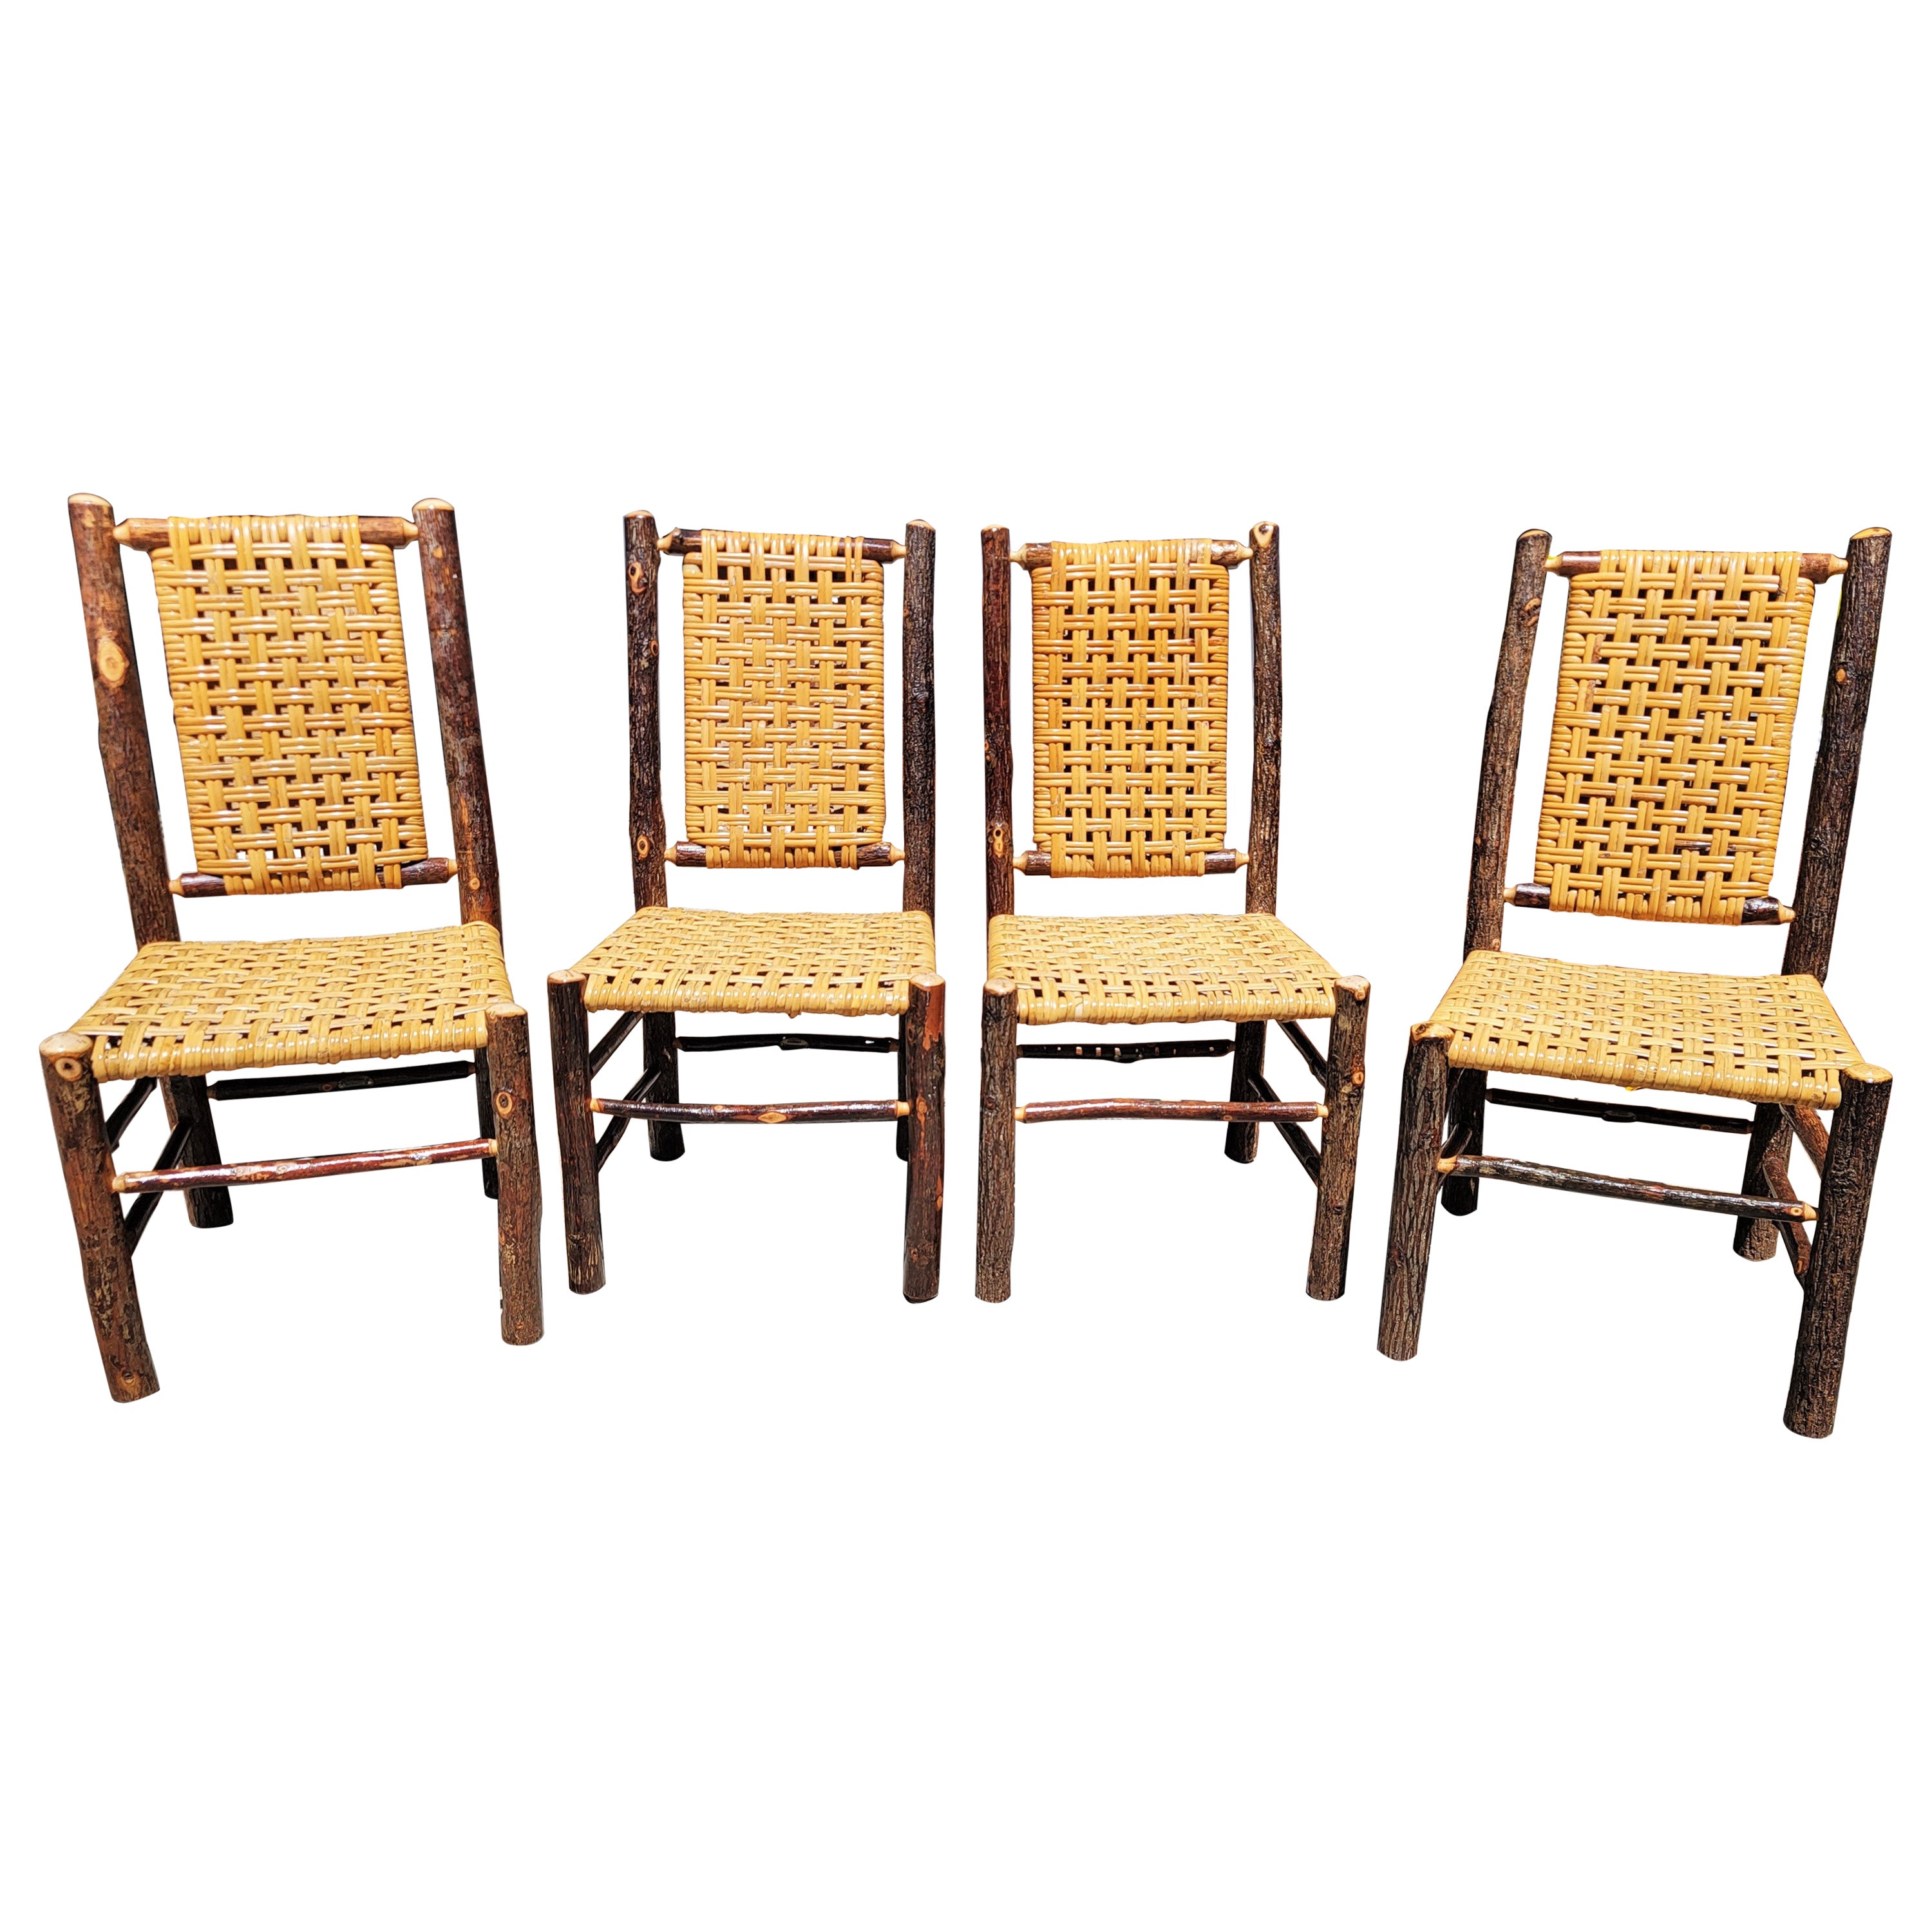 Set of 4 Hign Back Armless Old Hickory Chairs